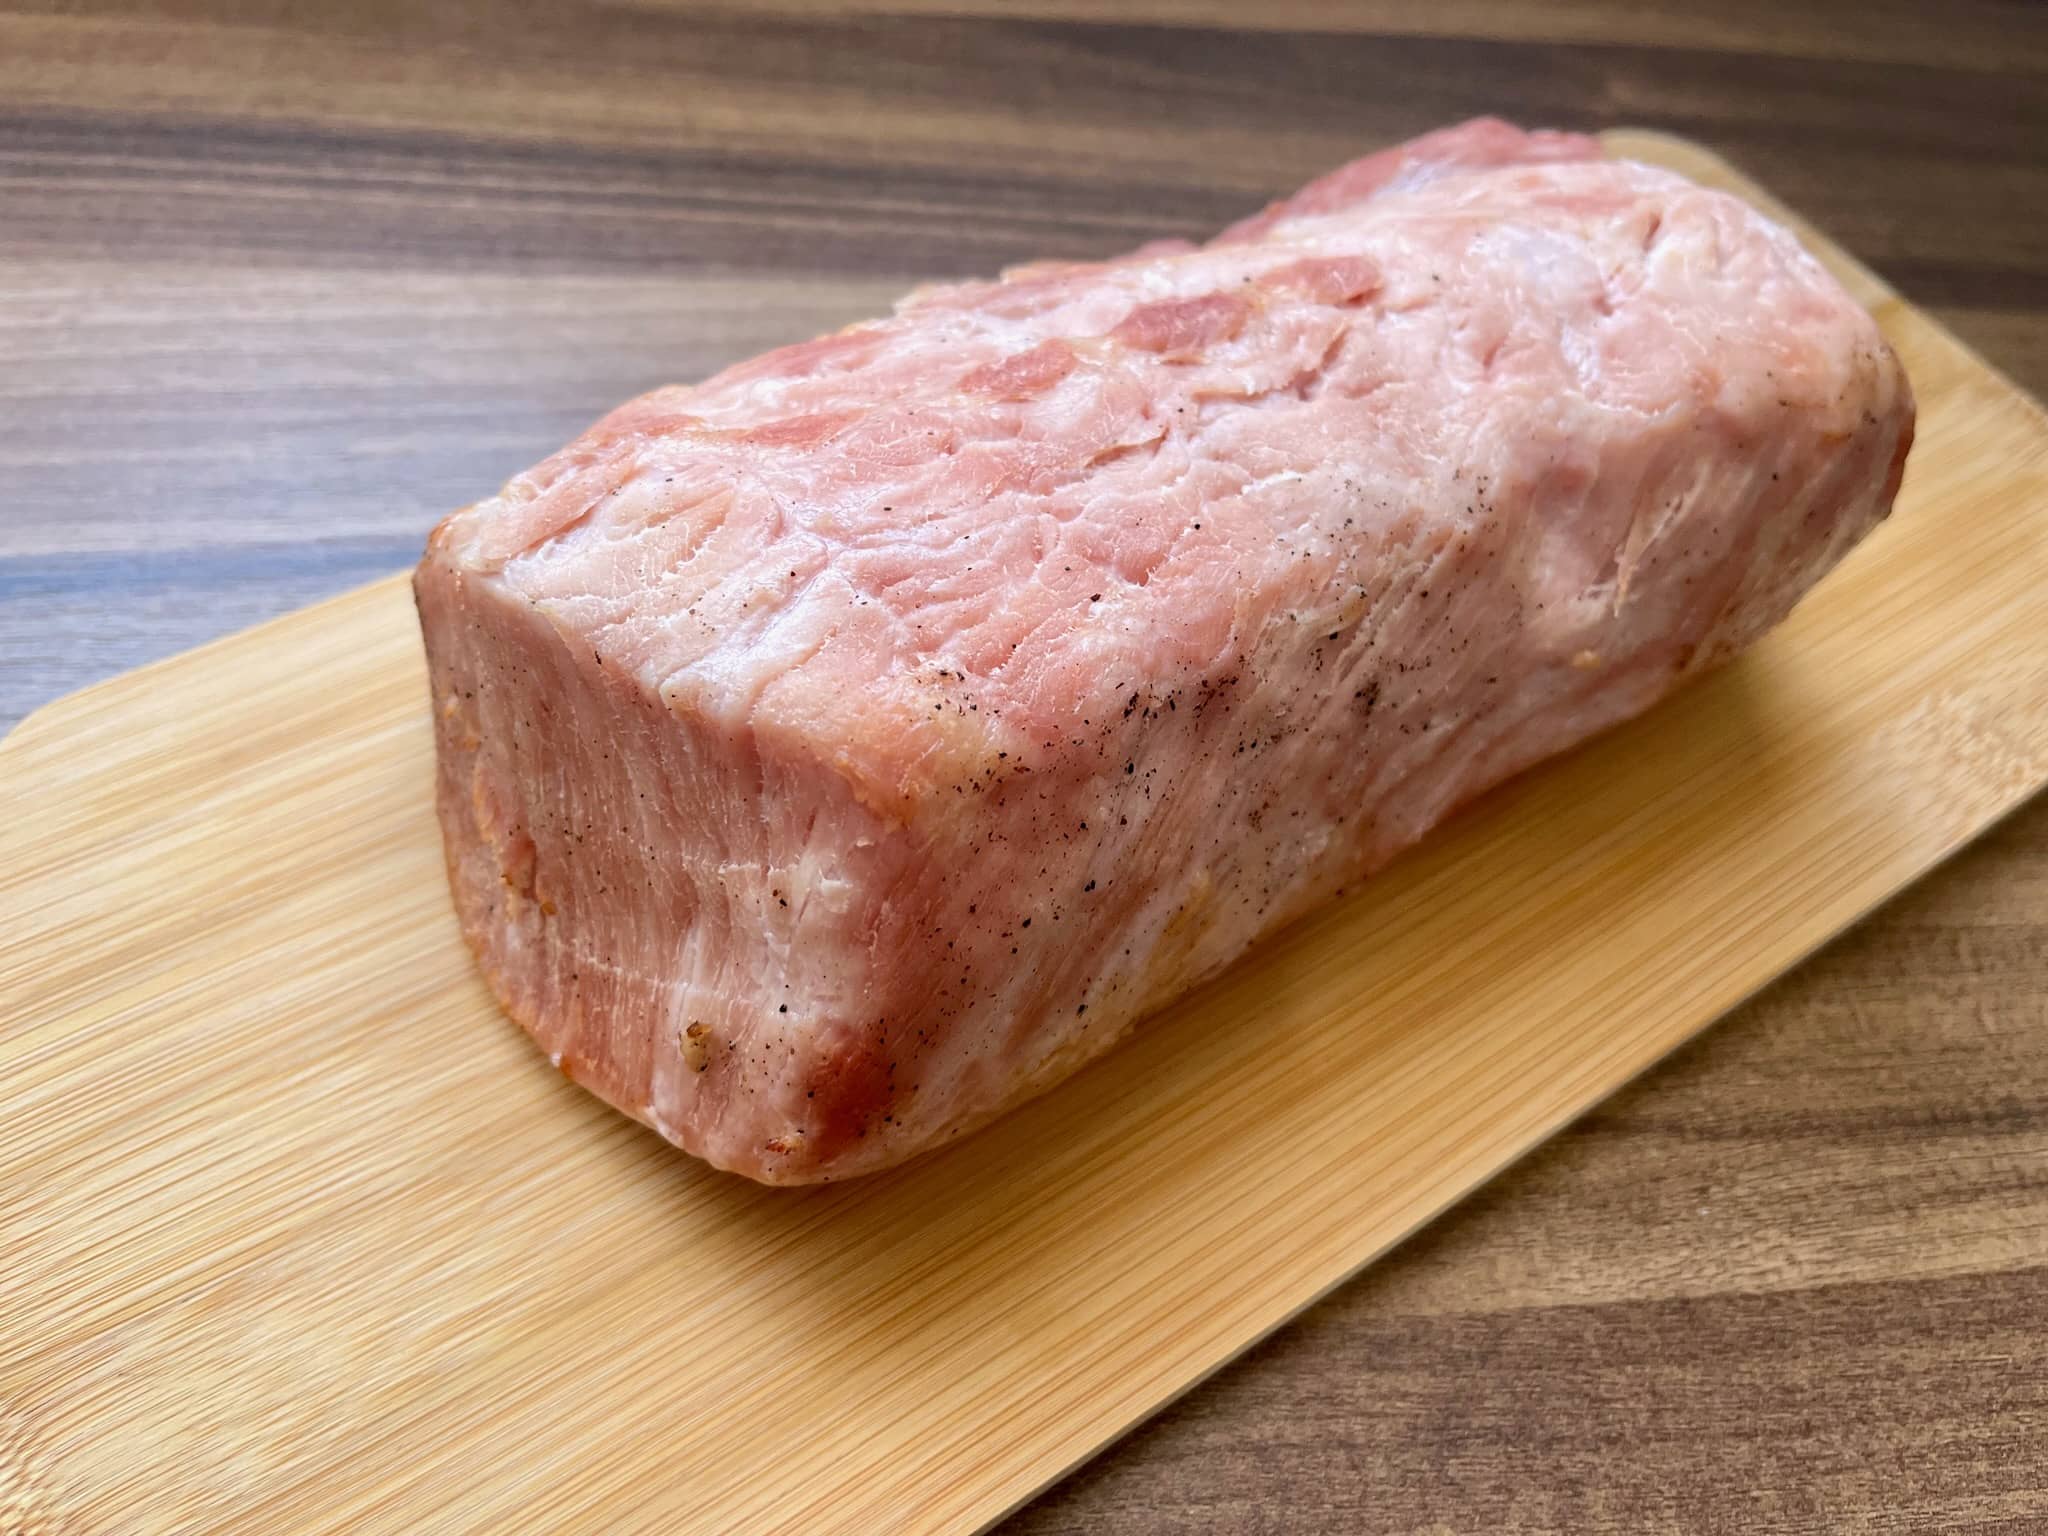 Baked marinated pork loin resting on a chopping board